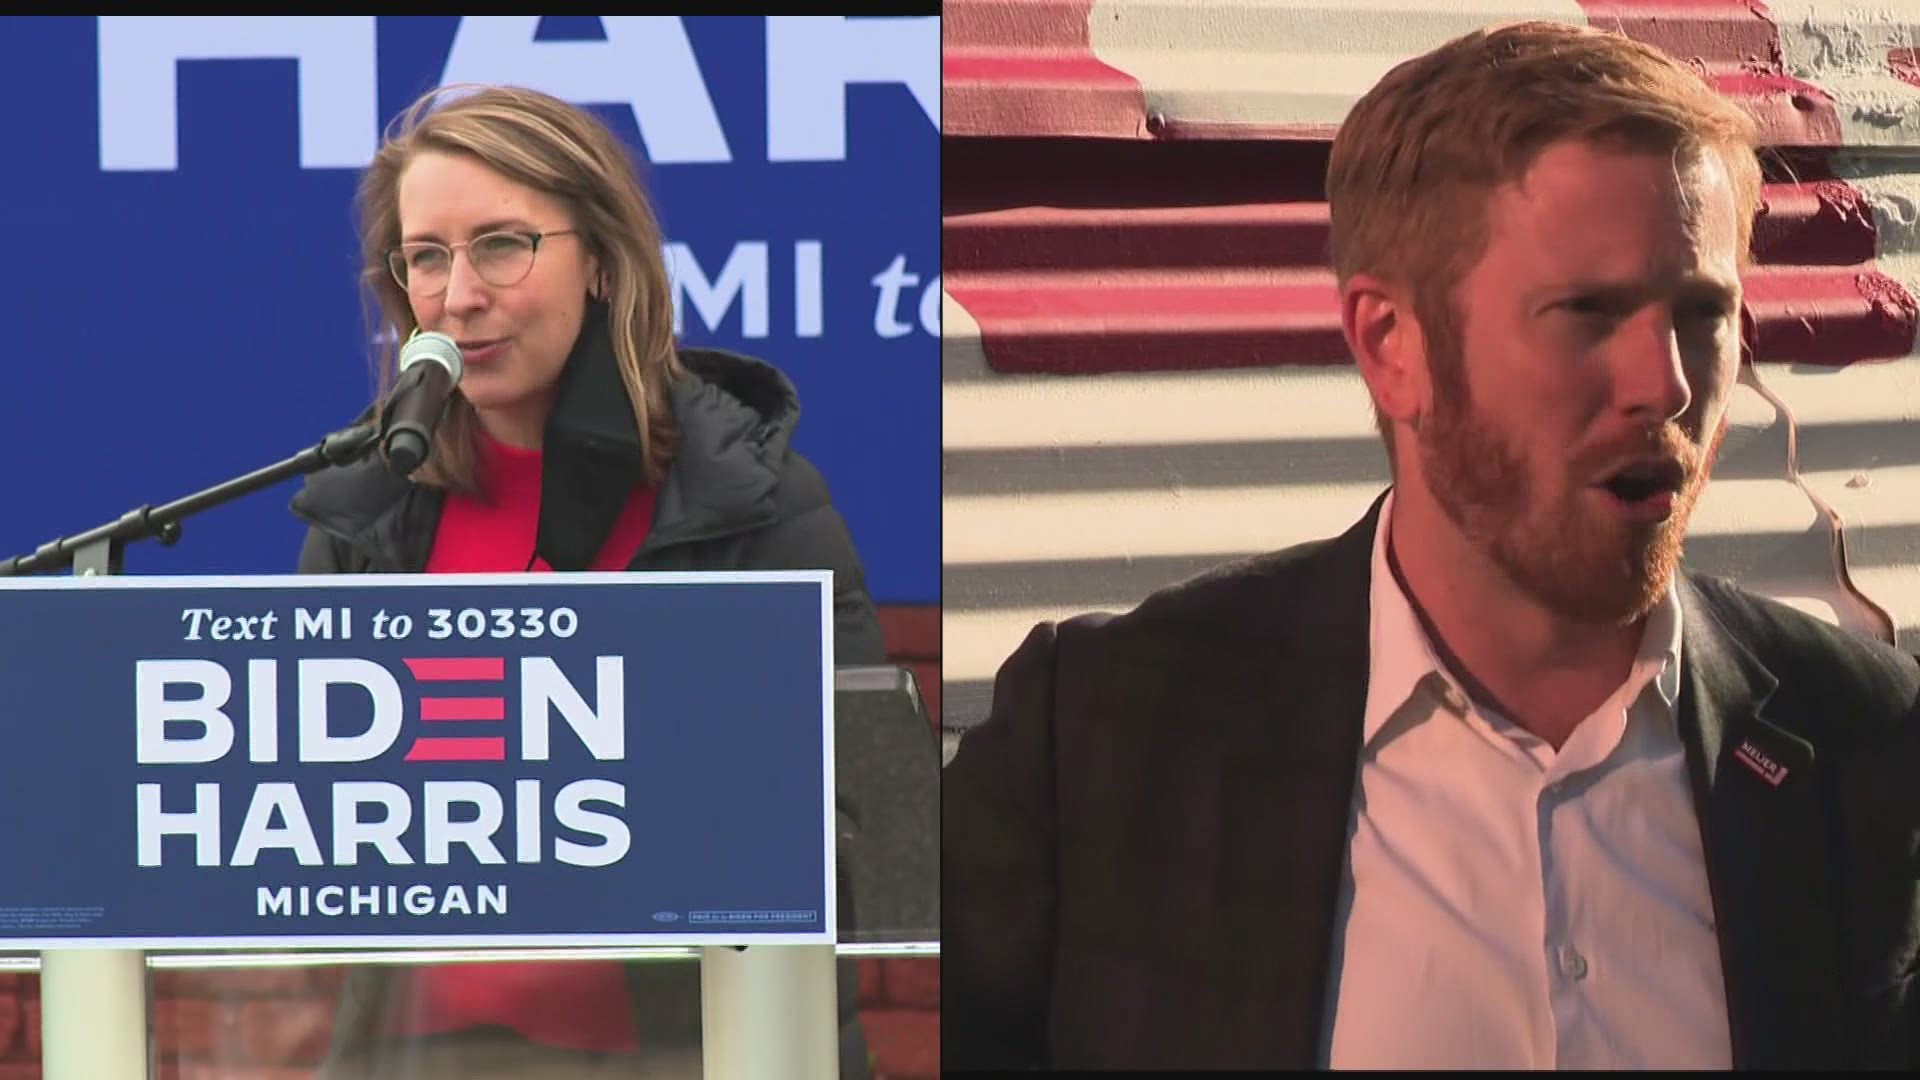 Just 15 days out from the election, candidates for Michigan's third congressional district both say the momentum behind their campaigns continues.